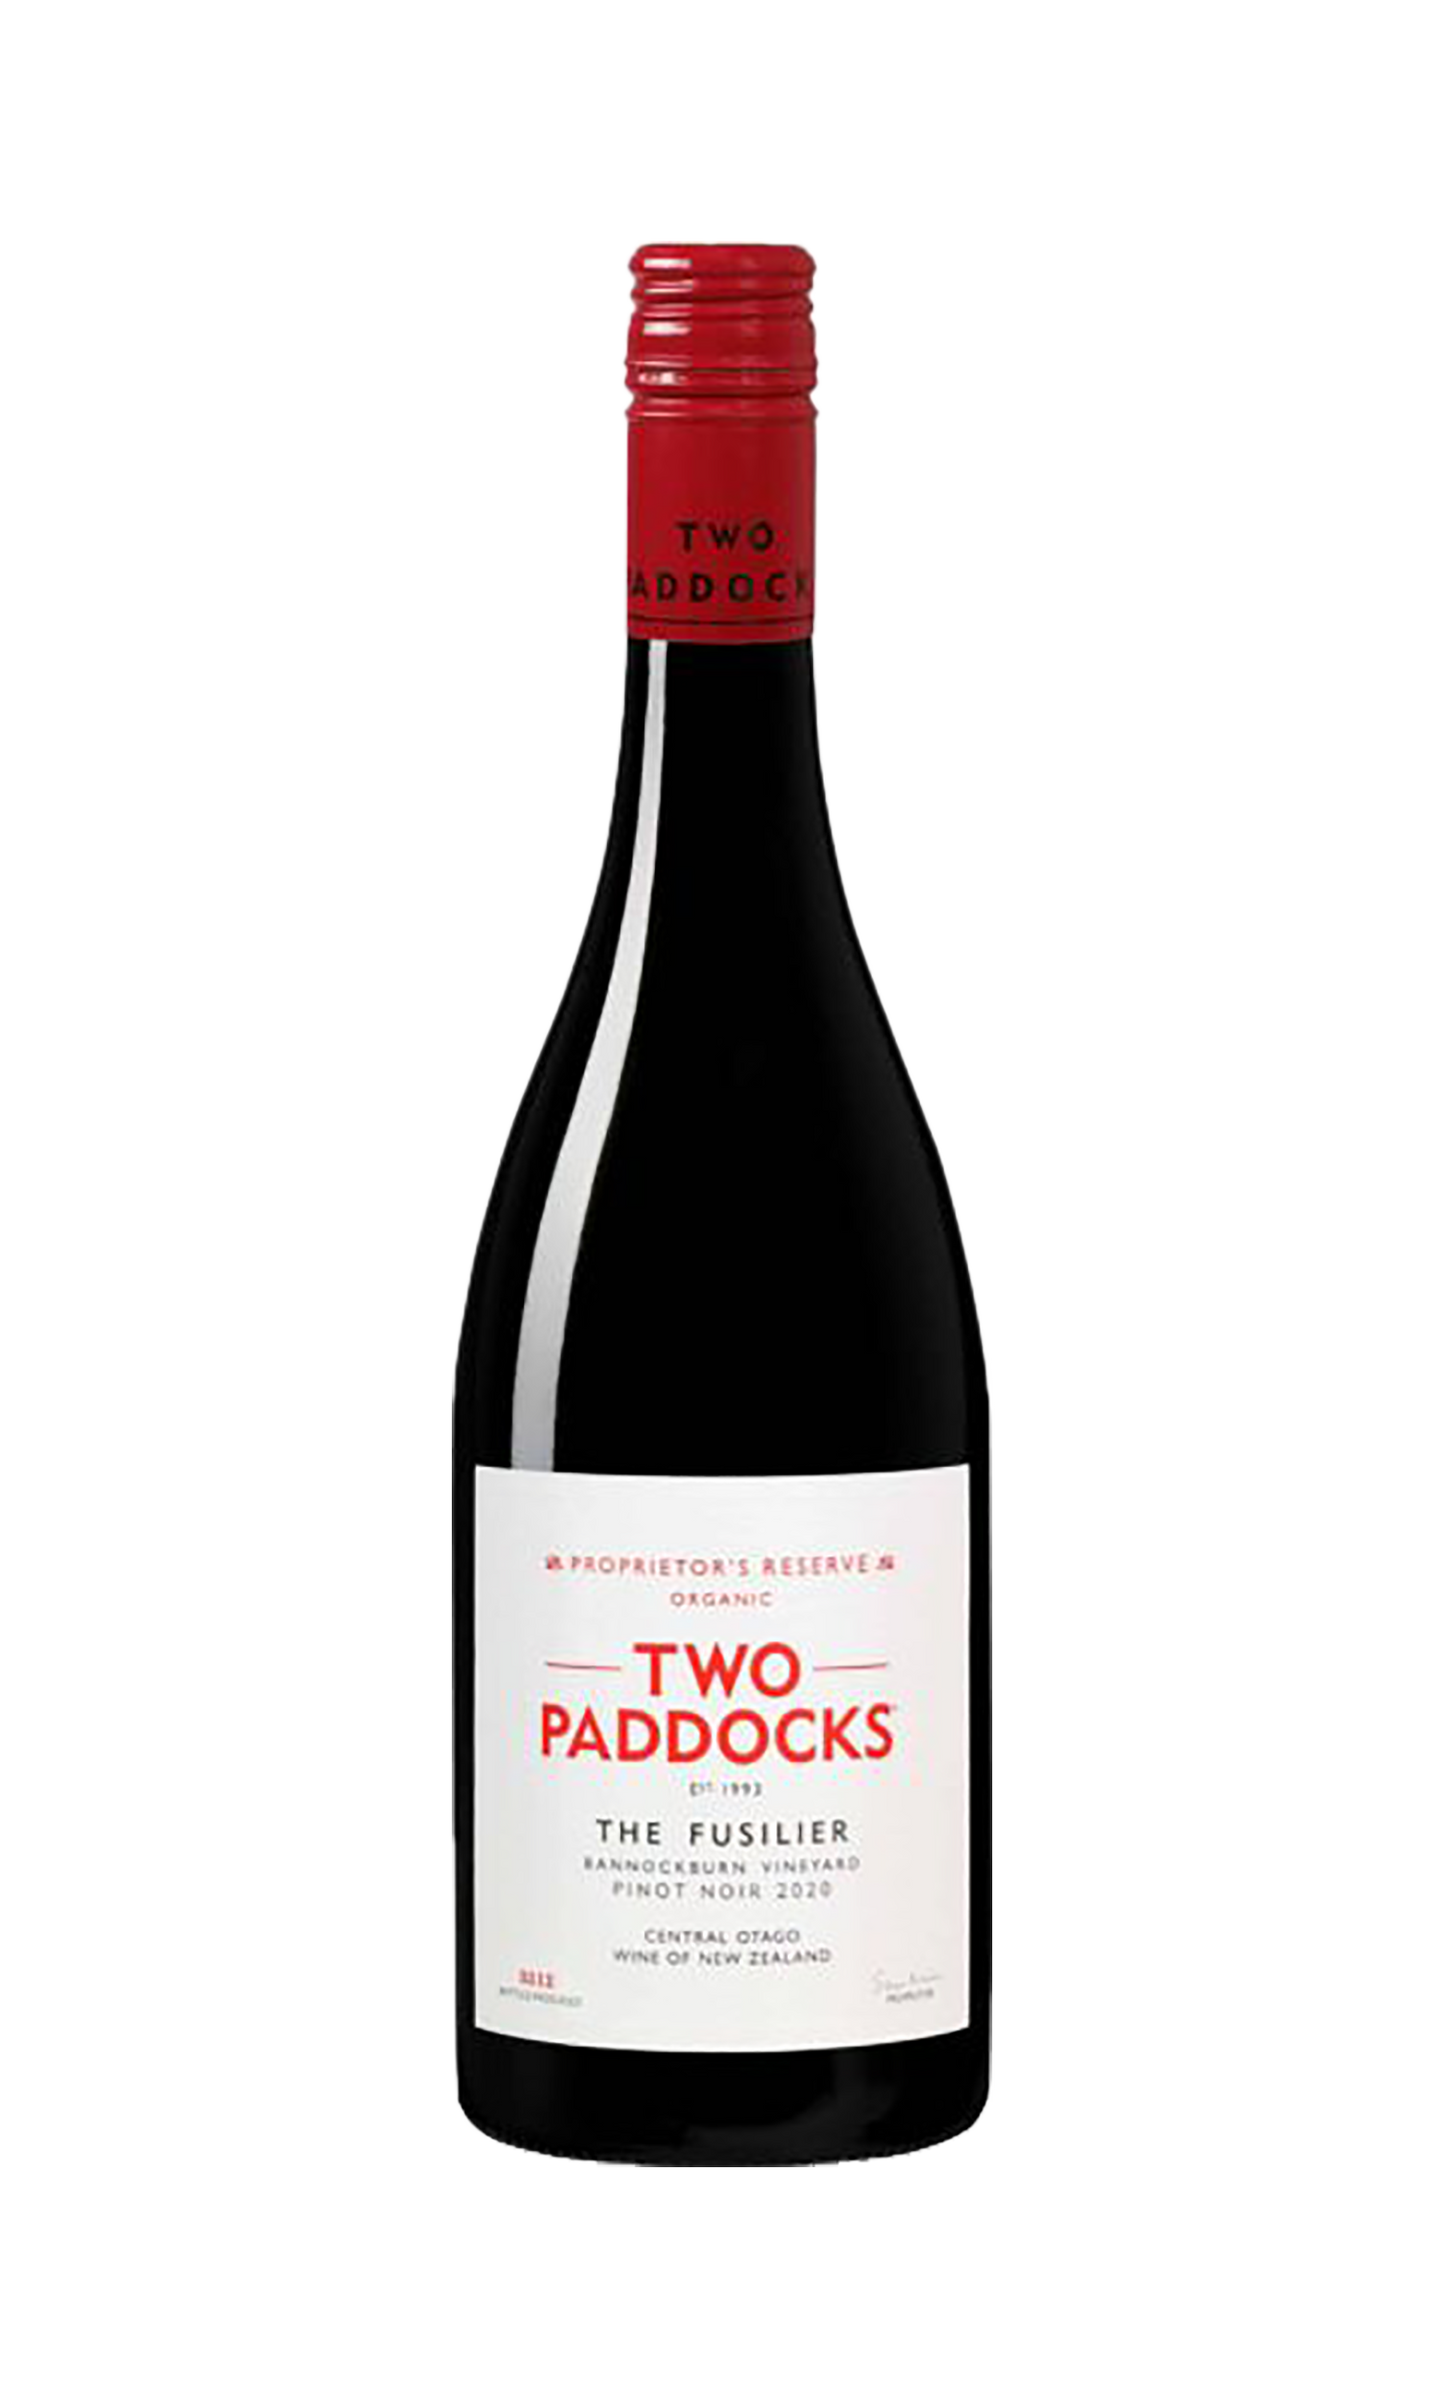 Two Paddocks The Fusilier Pinot Noir 2020